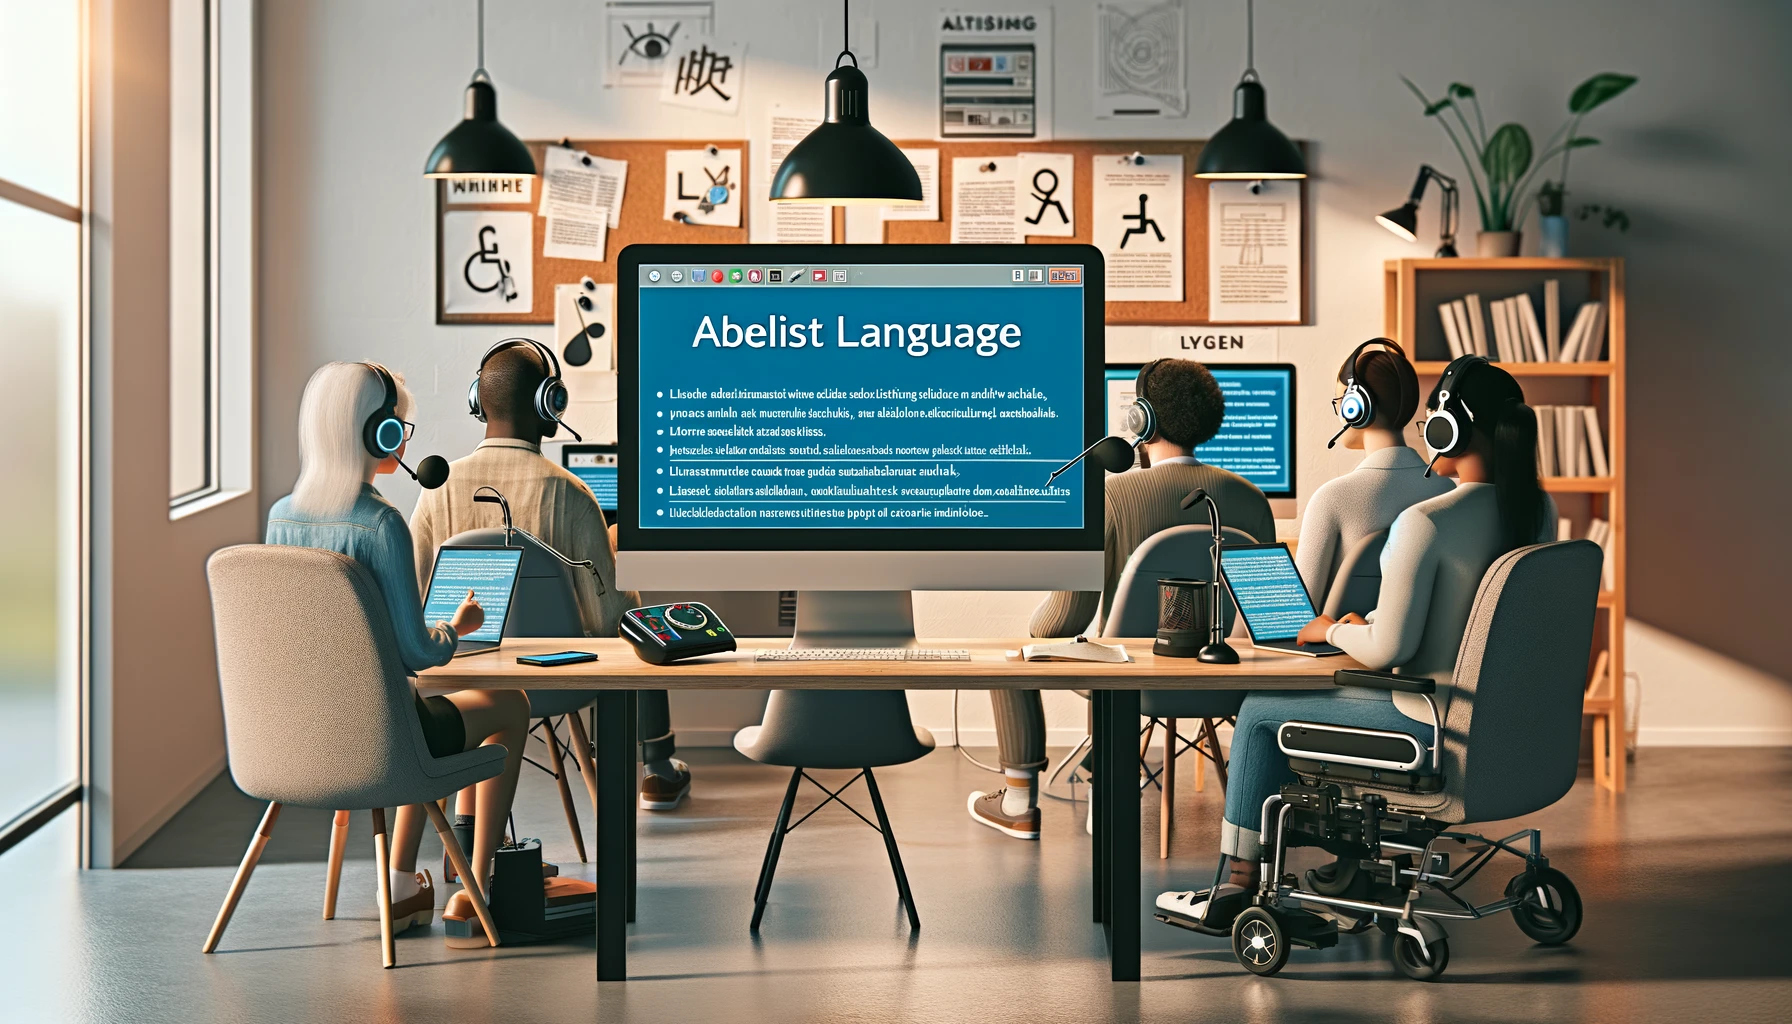 An inclusive, well-lit workspace with diverse individuals, some with visible disabilities, using various assistive technologies like hearing aids and screen readers. The central focus is on a computer screen displaying a document titled 'Ableist Language', which includes examples of inclusive language alternatives. The background is simple and uncluttered, highlighting the interaction of the individuals with the writing tools in a setting that symbolizes an adaptive and inclusive writing environment.